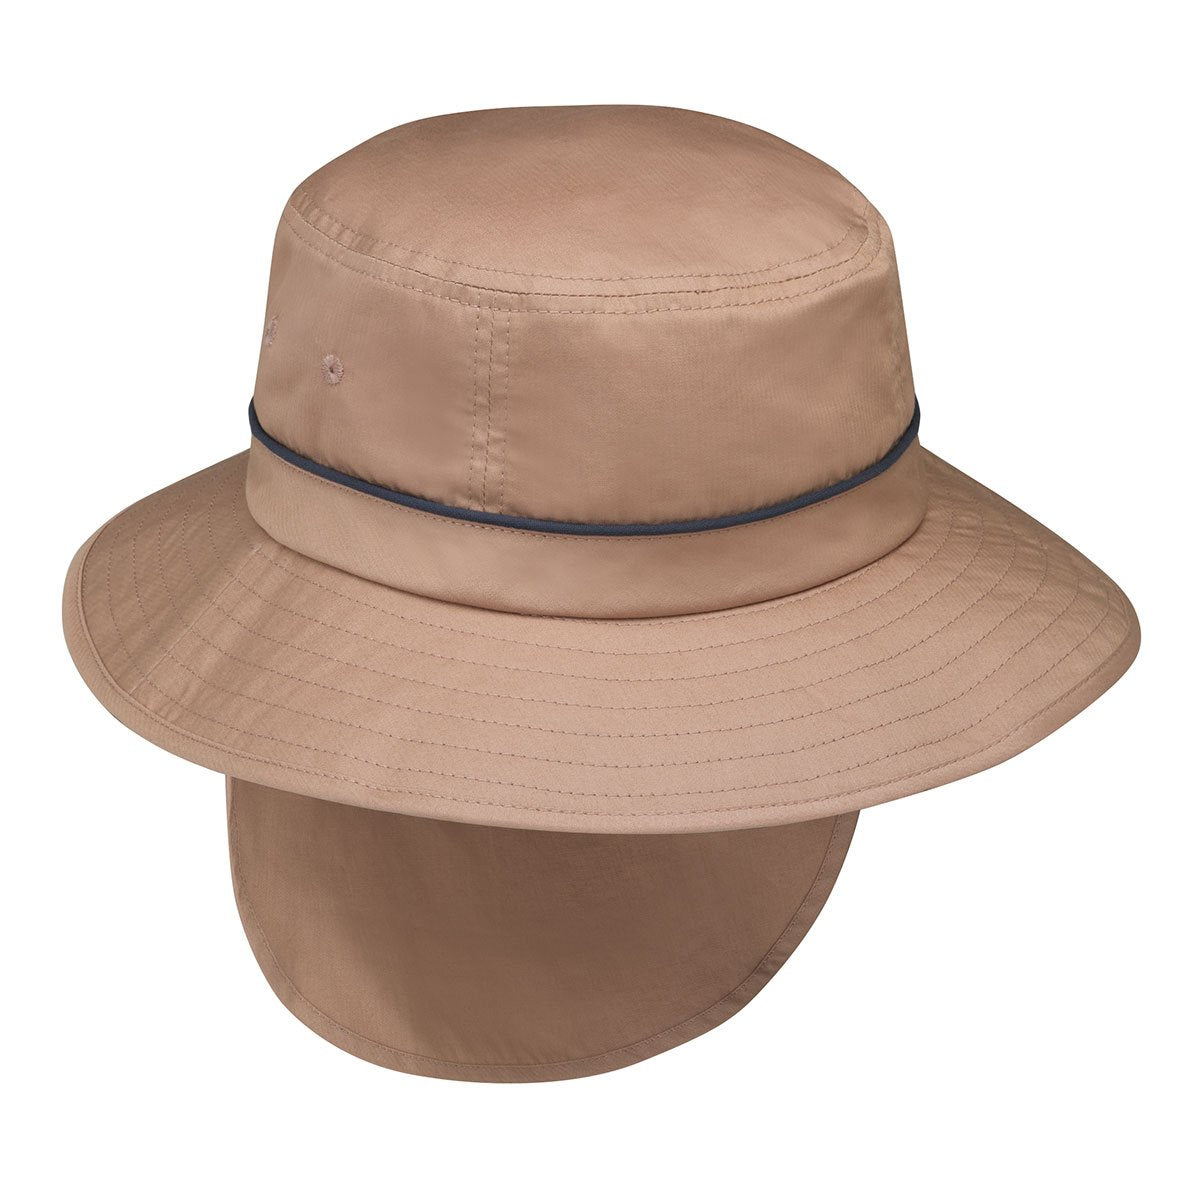 Featuring Men's Packable Bucket Style Shelton UPF Sun Hat with Chinstrap and Neck Flap from Wallaroo